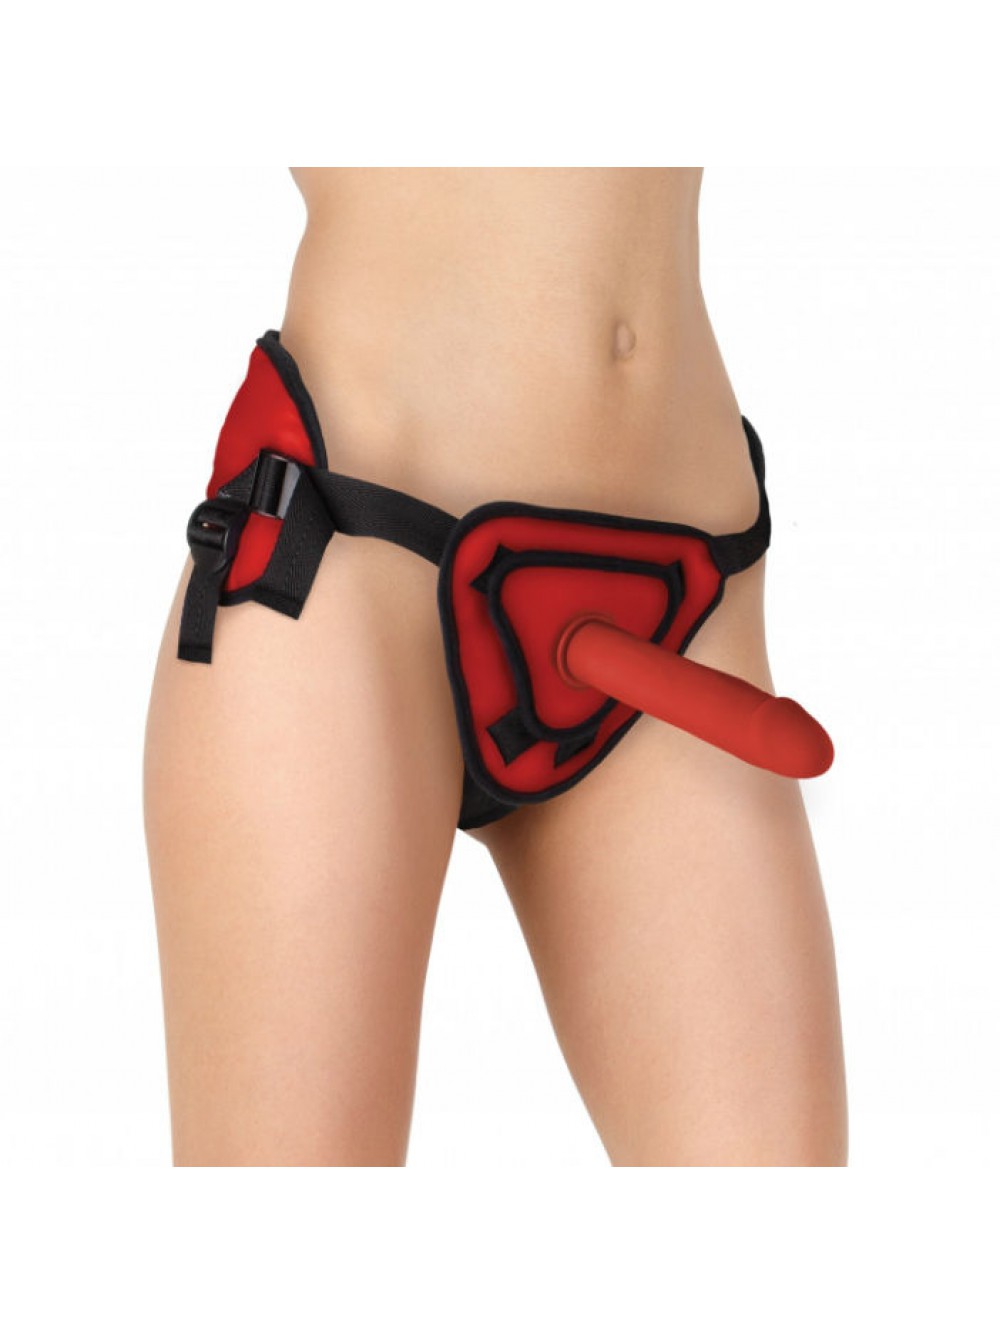 OUCH DELUXE STRAP ON SILICONE DELUXE RED  20.5  CM 8714273301628